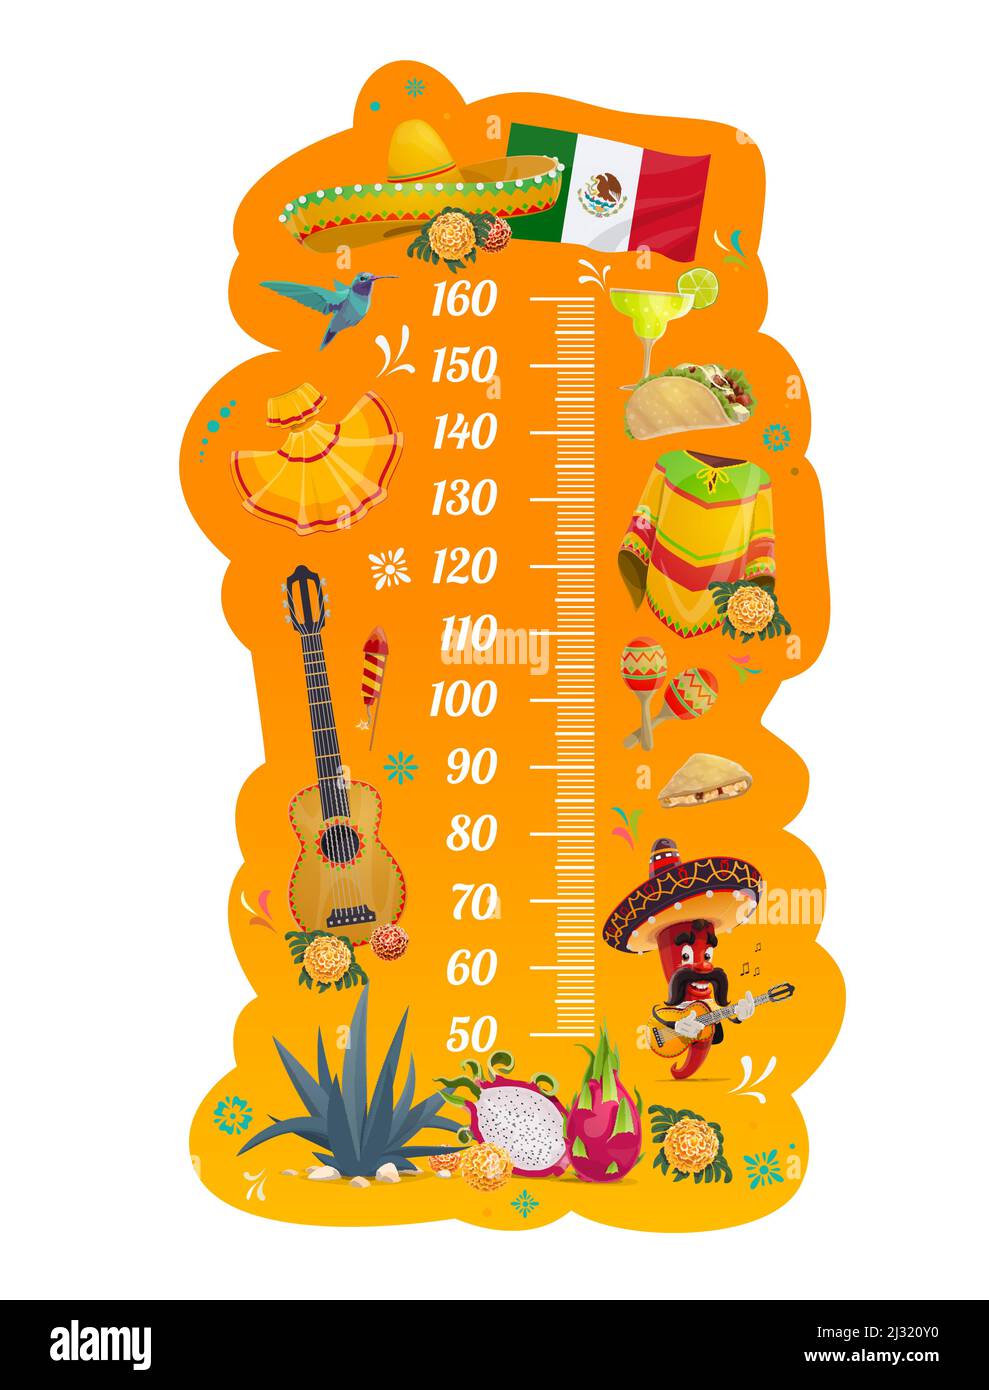 Stadiometer scale from 80 to 170 cm. Children height chart